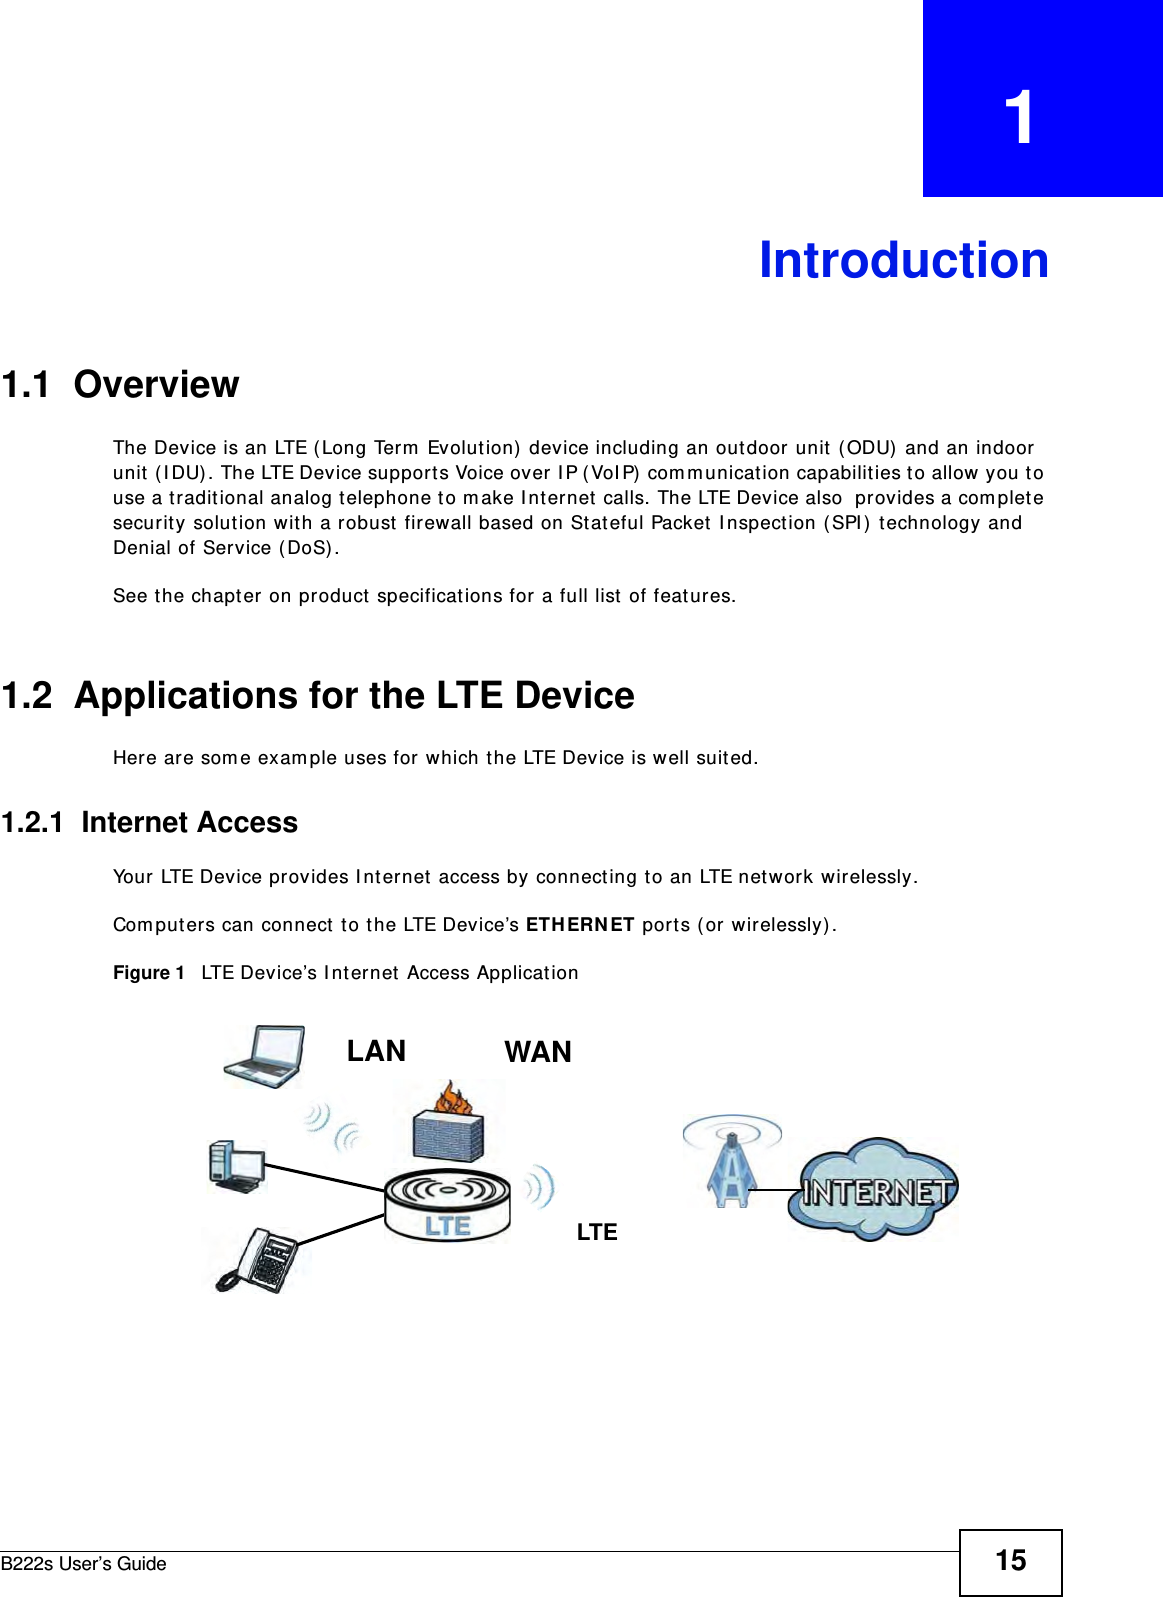 B222s User’s Guide 15CHAPTER   1Introduction1.1  OverviewThe Device is an LTE ( Long Term  Evolut ion)  device including an out door unit  ( ODU)  and an indoor unit  ( I DU). The LTE Device supports Voice over I P ( VoI P)  com m unicat ion capabilit ies t o allow you t o use a t radit ional analog t elephone t o m ake I nternet  calls. The LTE Device also  provides a com plet e securit y solution wit h a robust firewall based on St ateful Packet  I nspection ( SPI )  t echnology and Denial of Service ( DoS) .See t he chapt er on product  specificat ions for a full list of features.1.2  Applications for the LTE DeviceHere are som e exam ple uses for which t he LTE Device is well suit ed.1.2.1  Internet AccessYour LTE Device provides I nternet access by connect ing t o an LTE net w ork wirelessly.Com put ers can connect to the LTE Device’s ETH ERN ET port s (or wirelessly) .Figure 1   LTE Device’s I nternet  Access Applicat ionLAN WANLTE